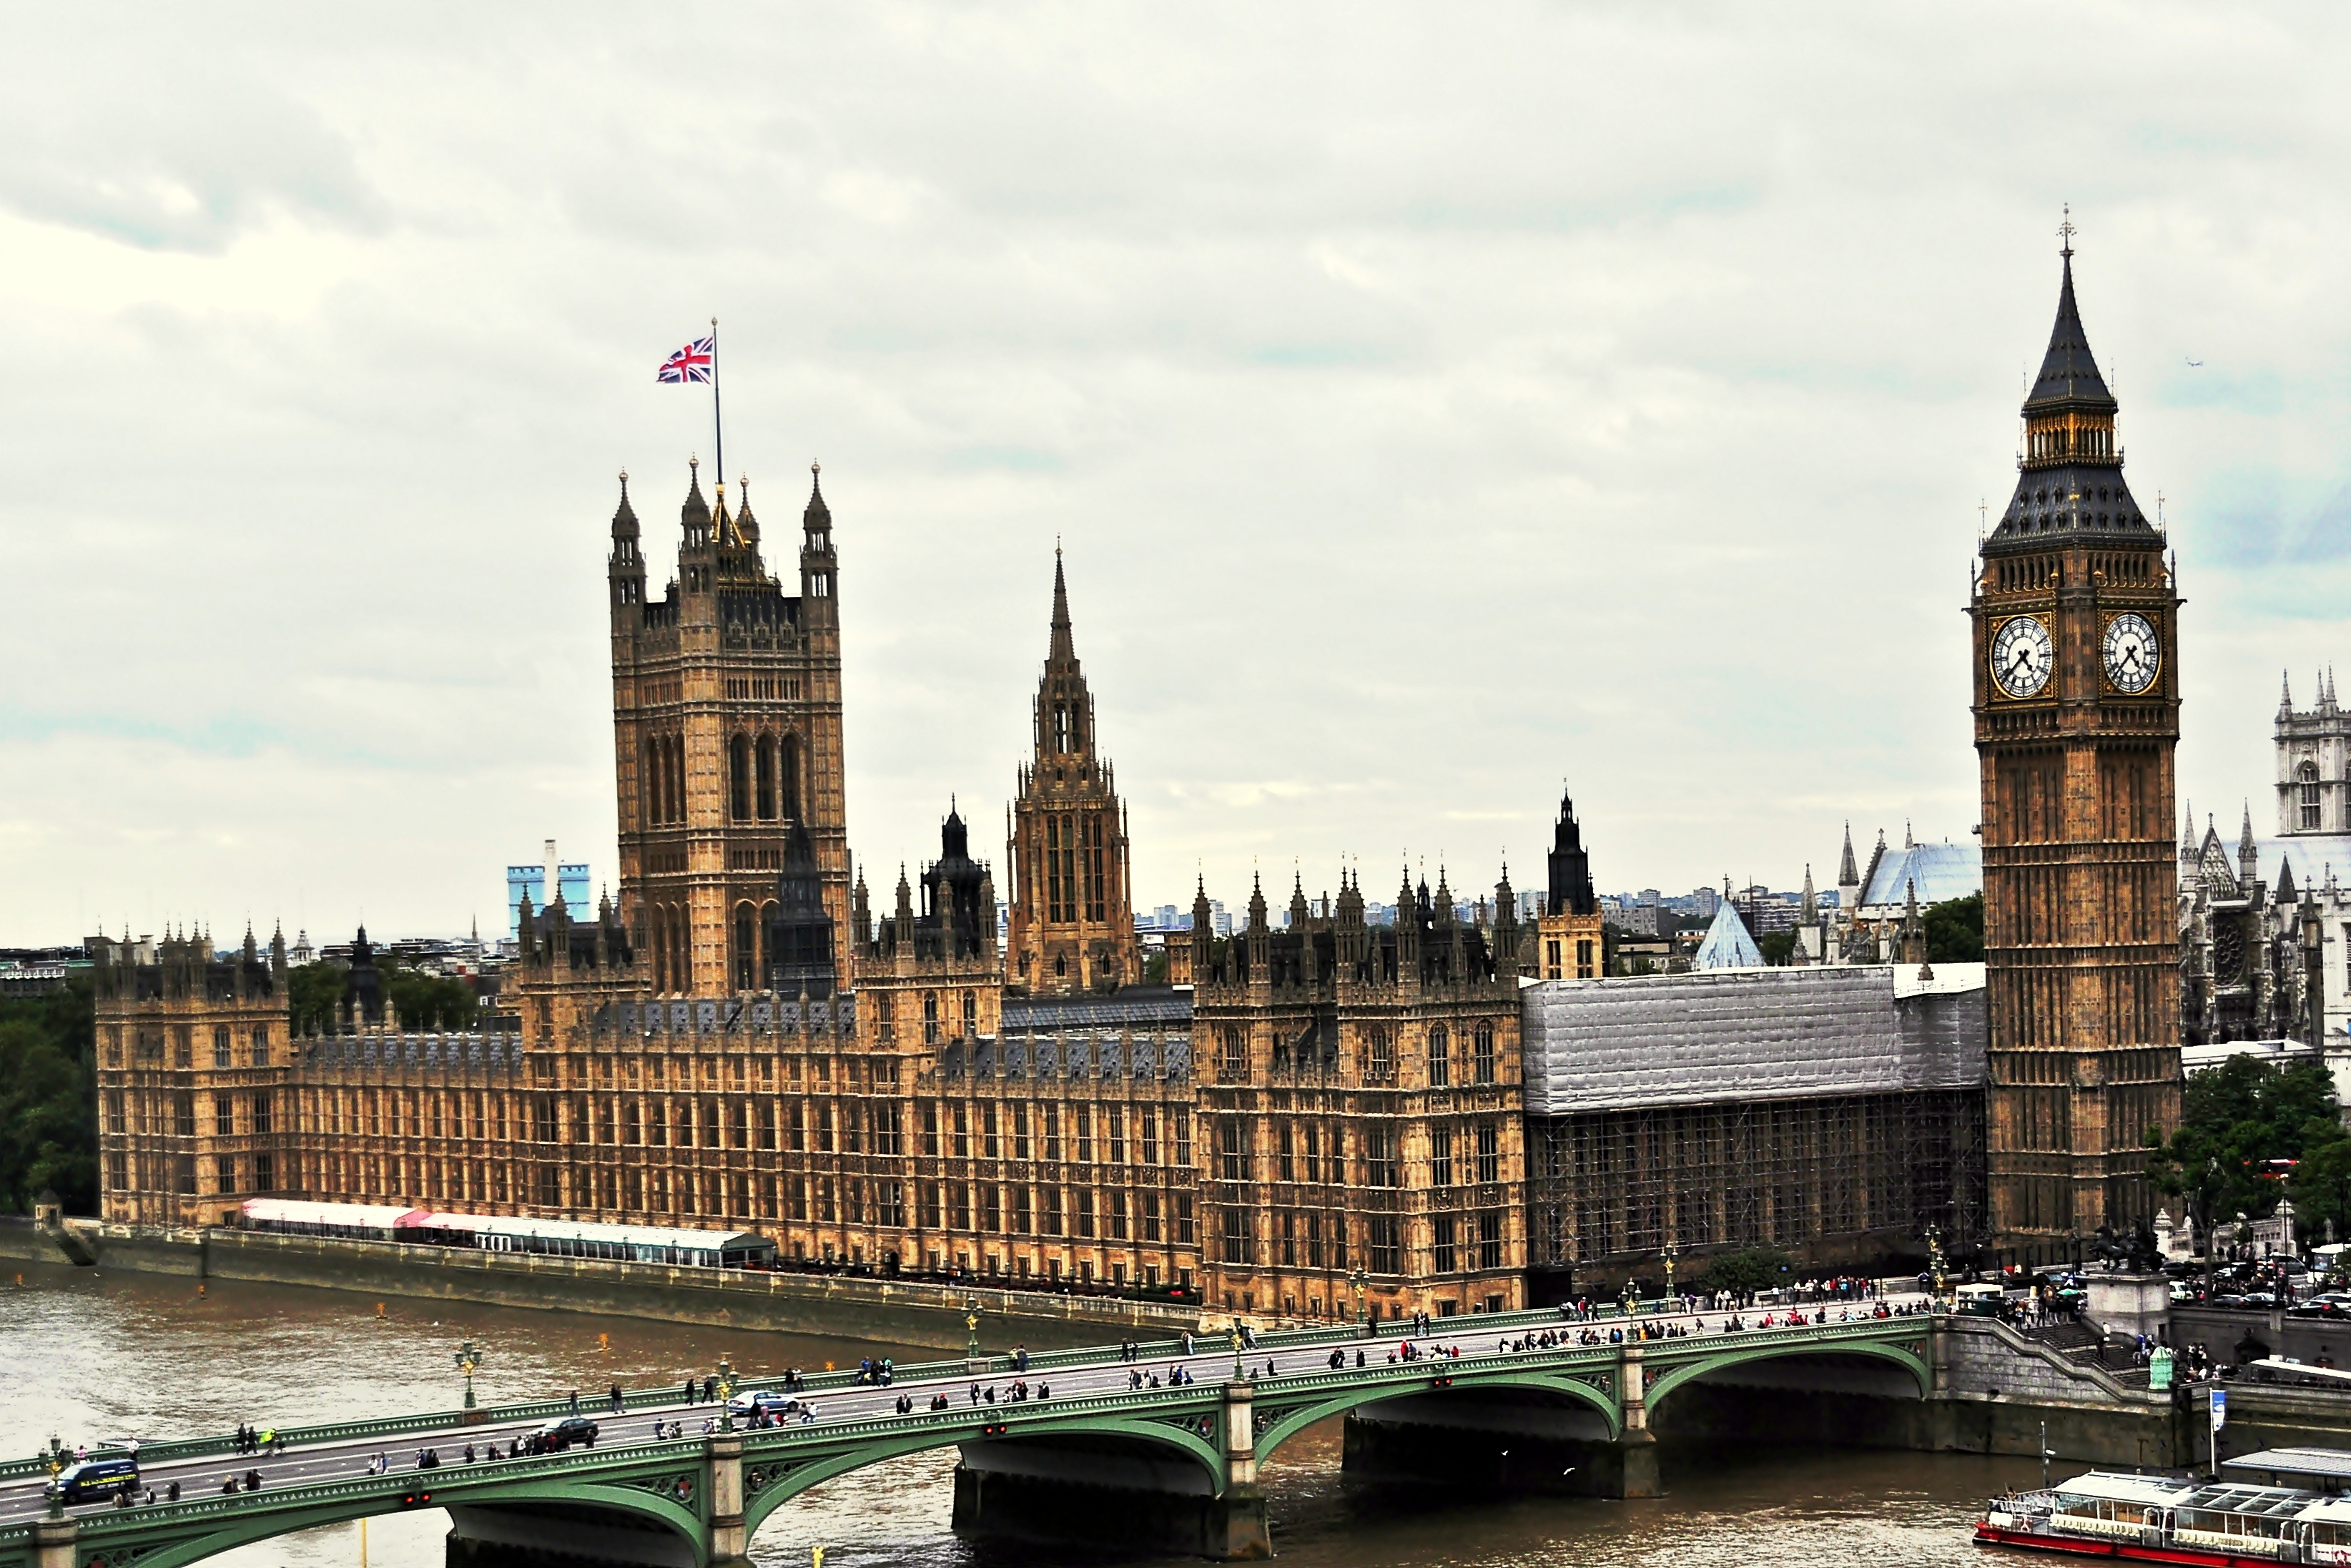 File:Palace of Westminster, London.JPG - Wikimedia Commons